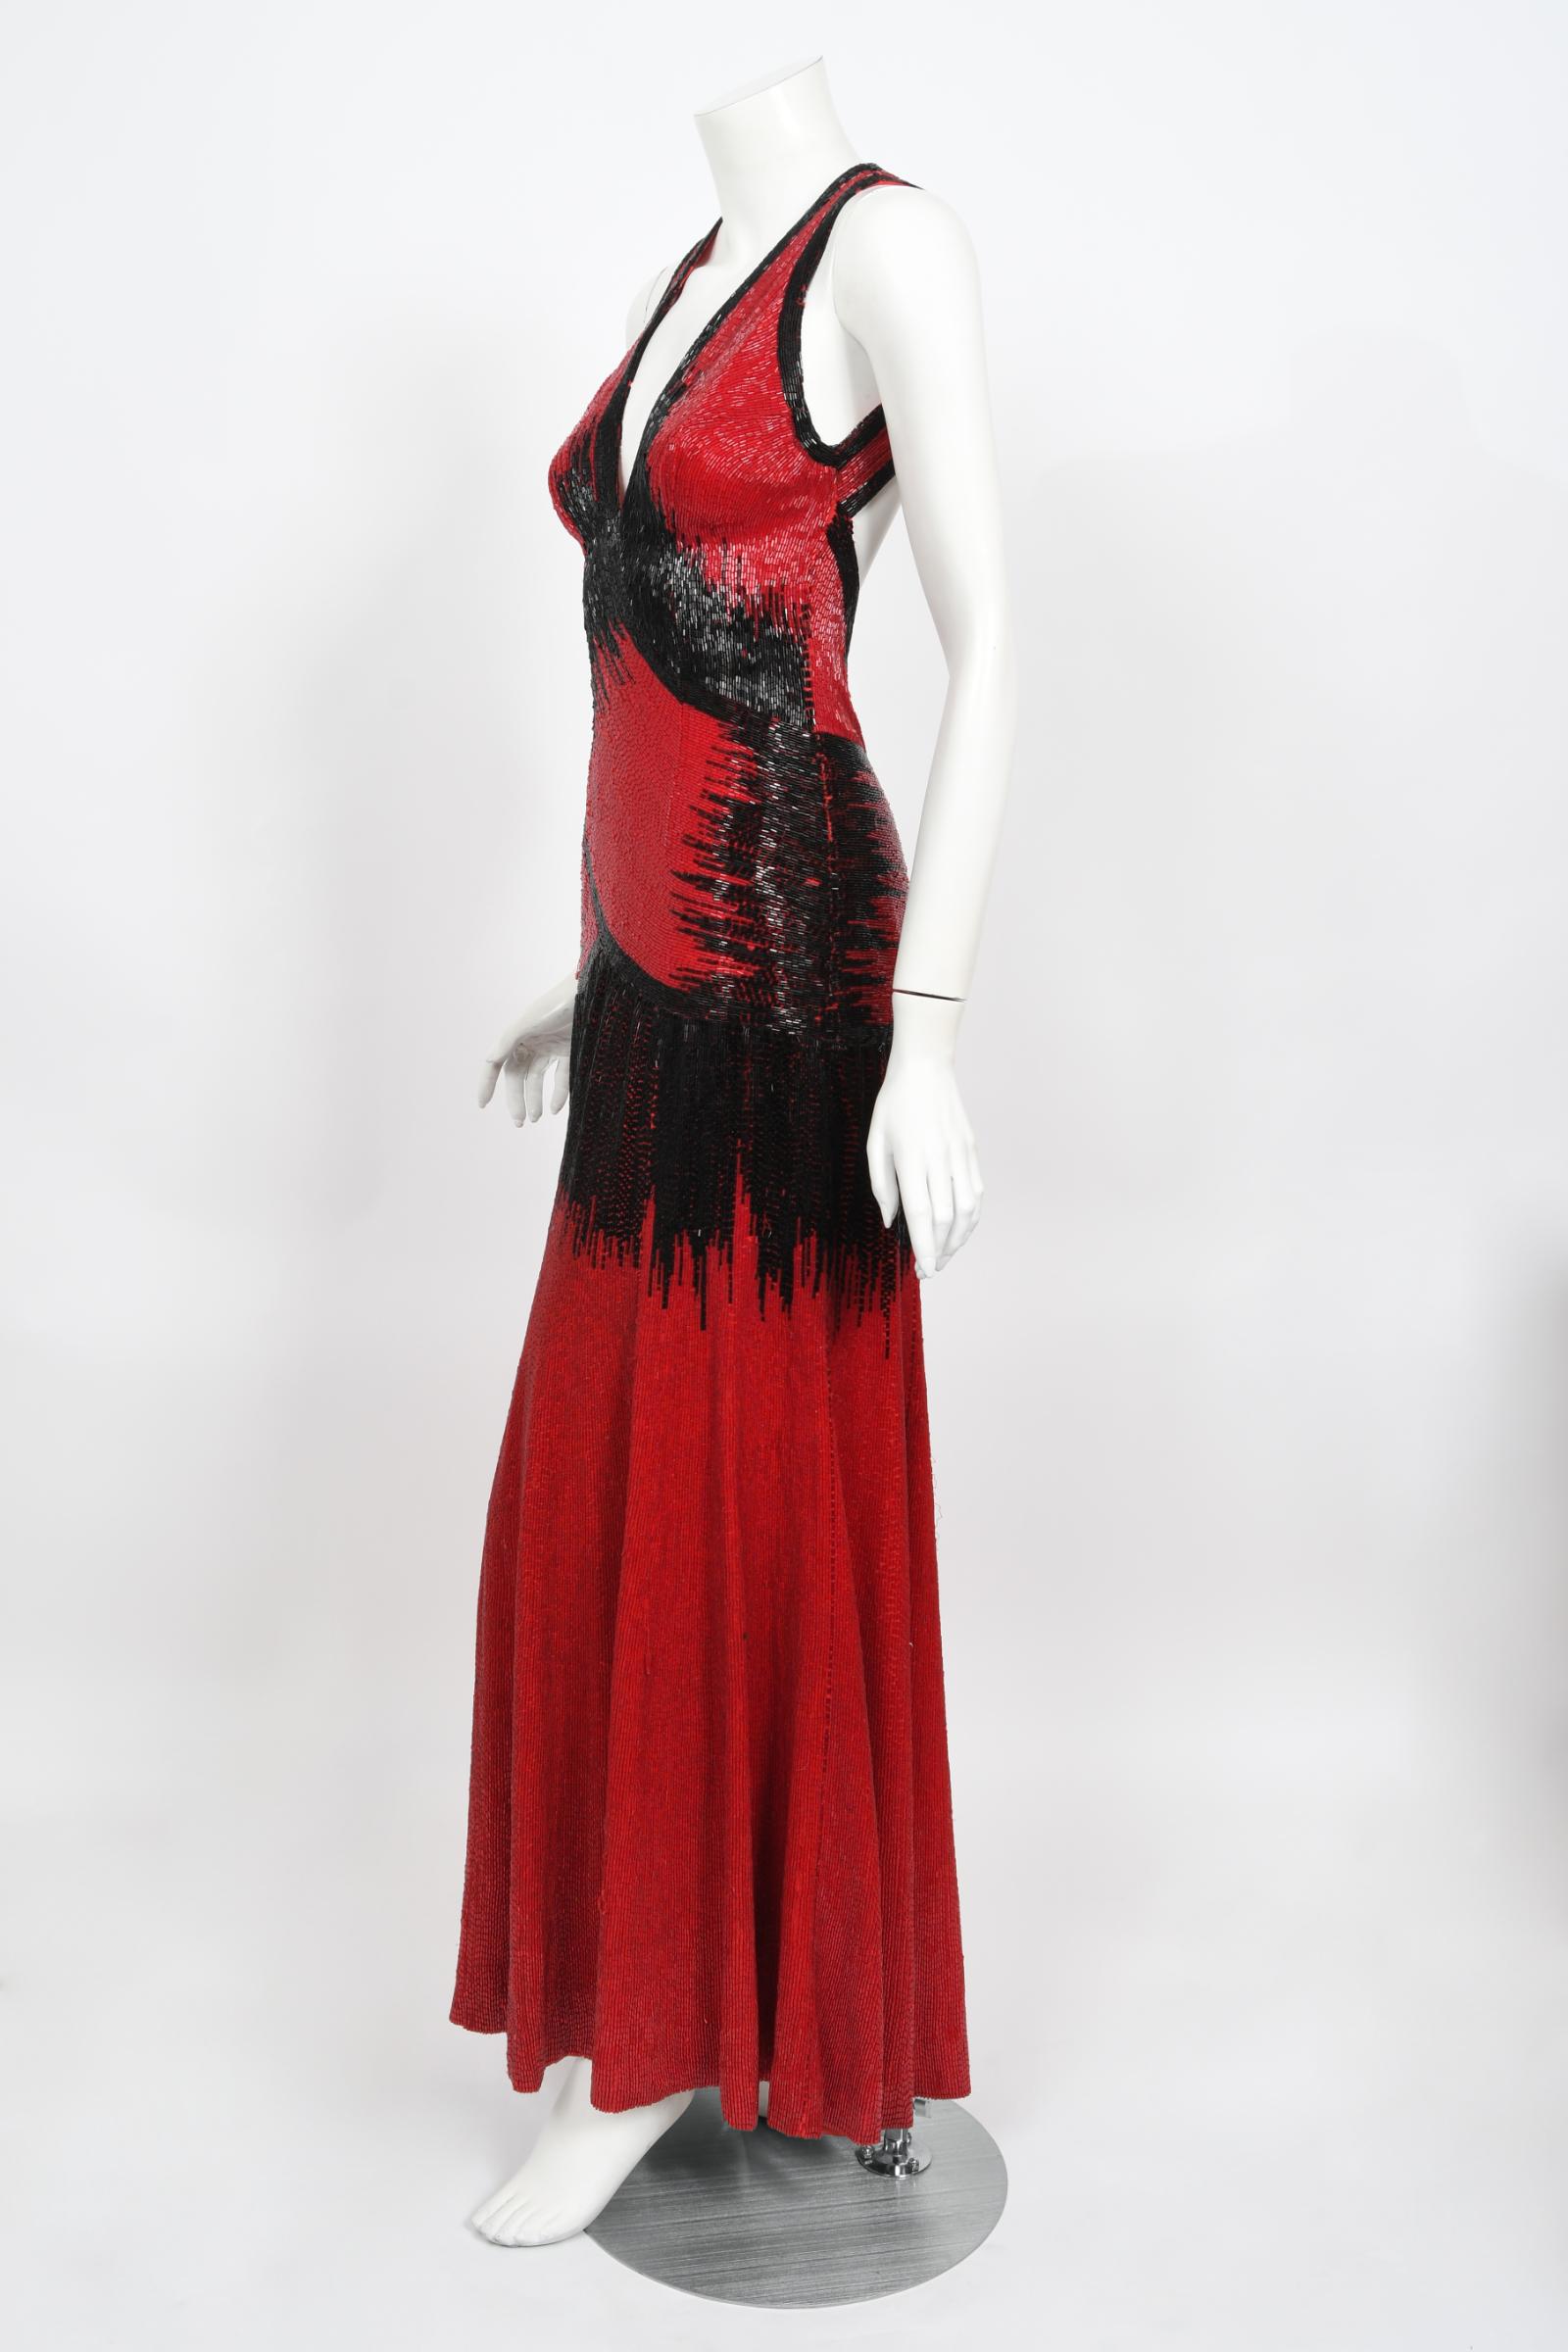 Iconic 1970s Museum Quality Fully Beaded Couture Backless Bias Cut Trained Gown  For Sale 5